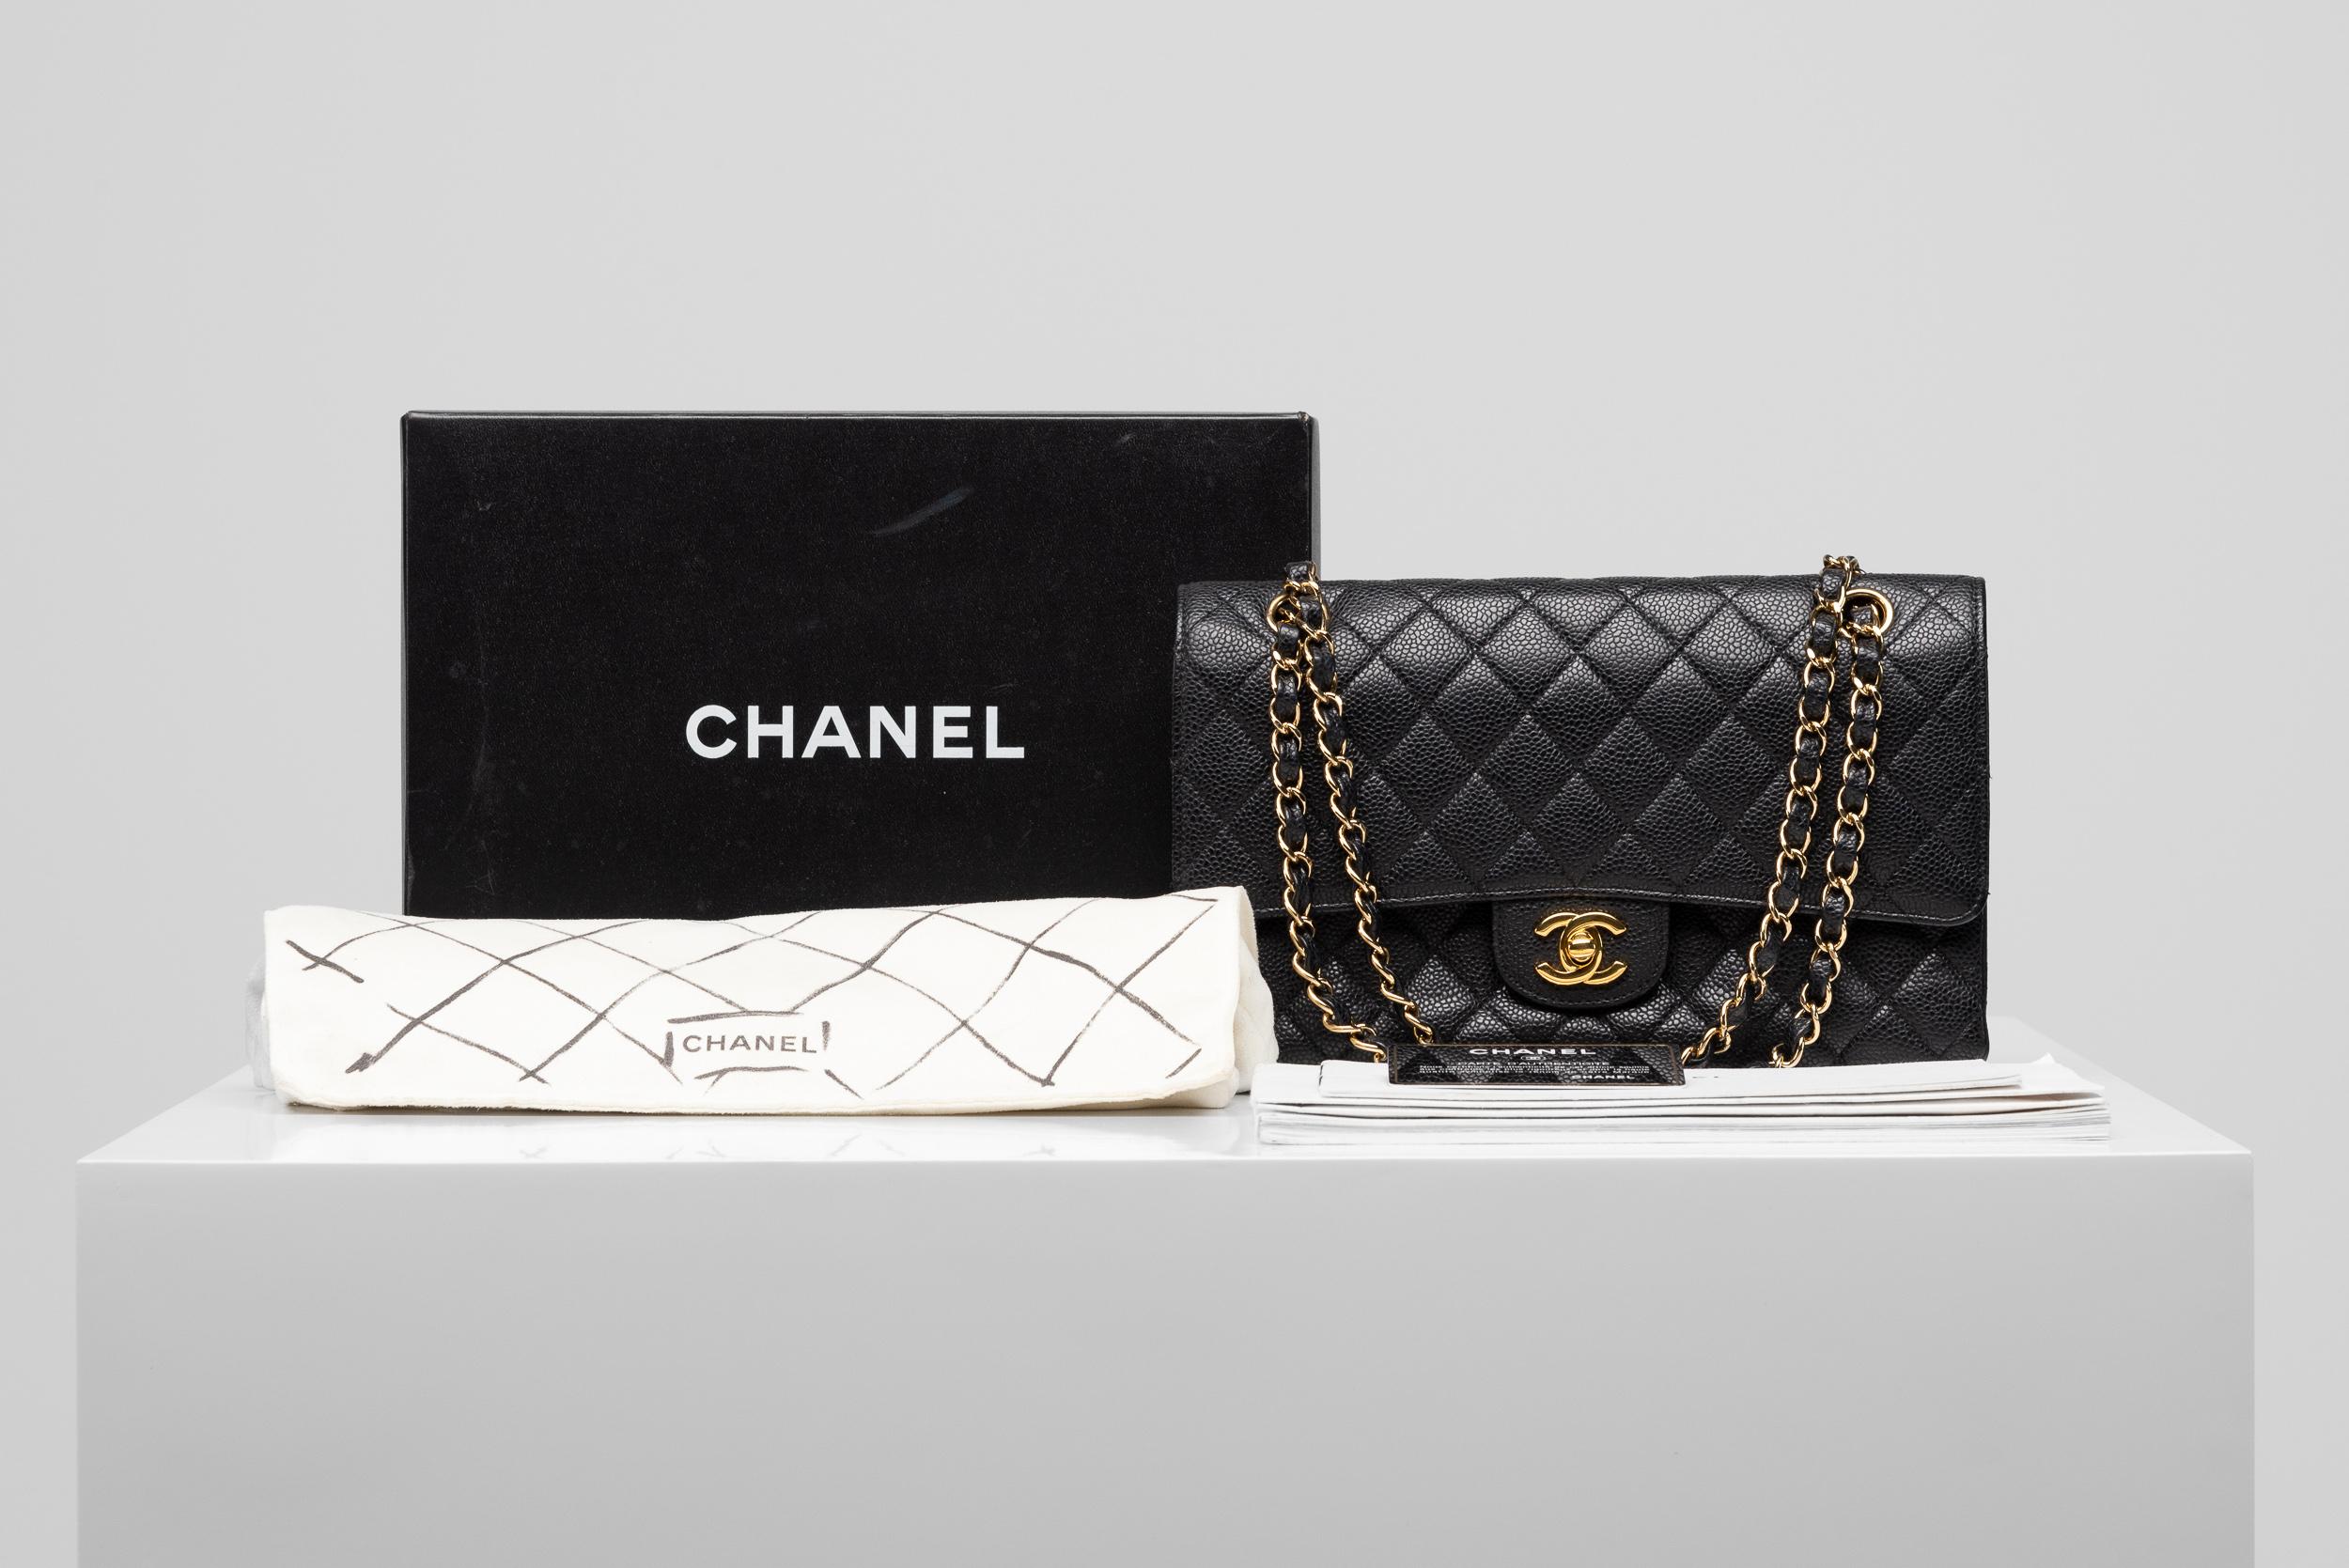 From the collection of SAVINETI we offer this Chanel Classic Flap Medium:
- Brand: Chanel
- Model: Classic Flap Medium Caviar
- Year: 2014
- Code: 19852899
- Condition: Good (original condition)
- Materials: caviar leather, gold hardware
- Extras: